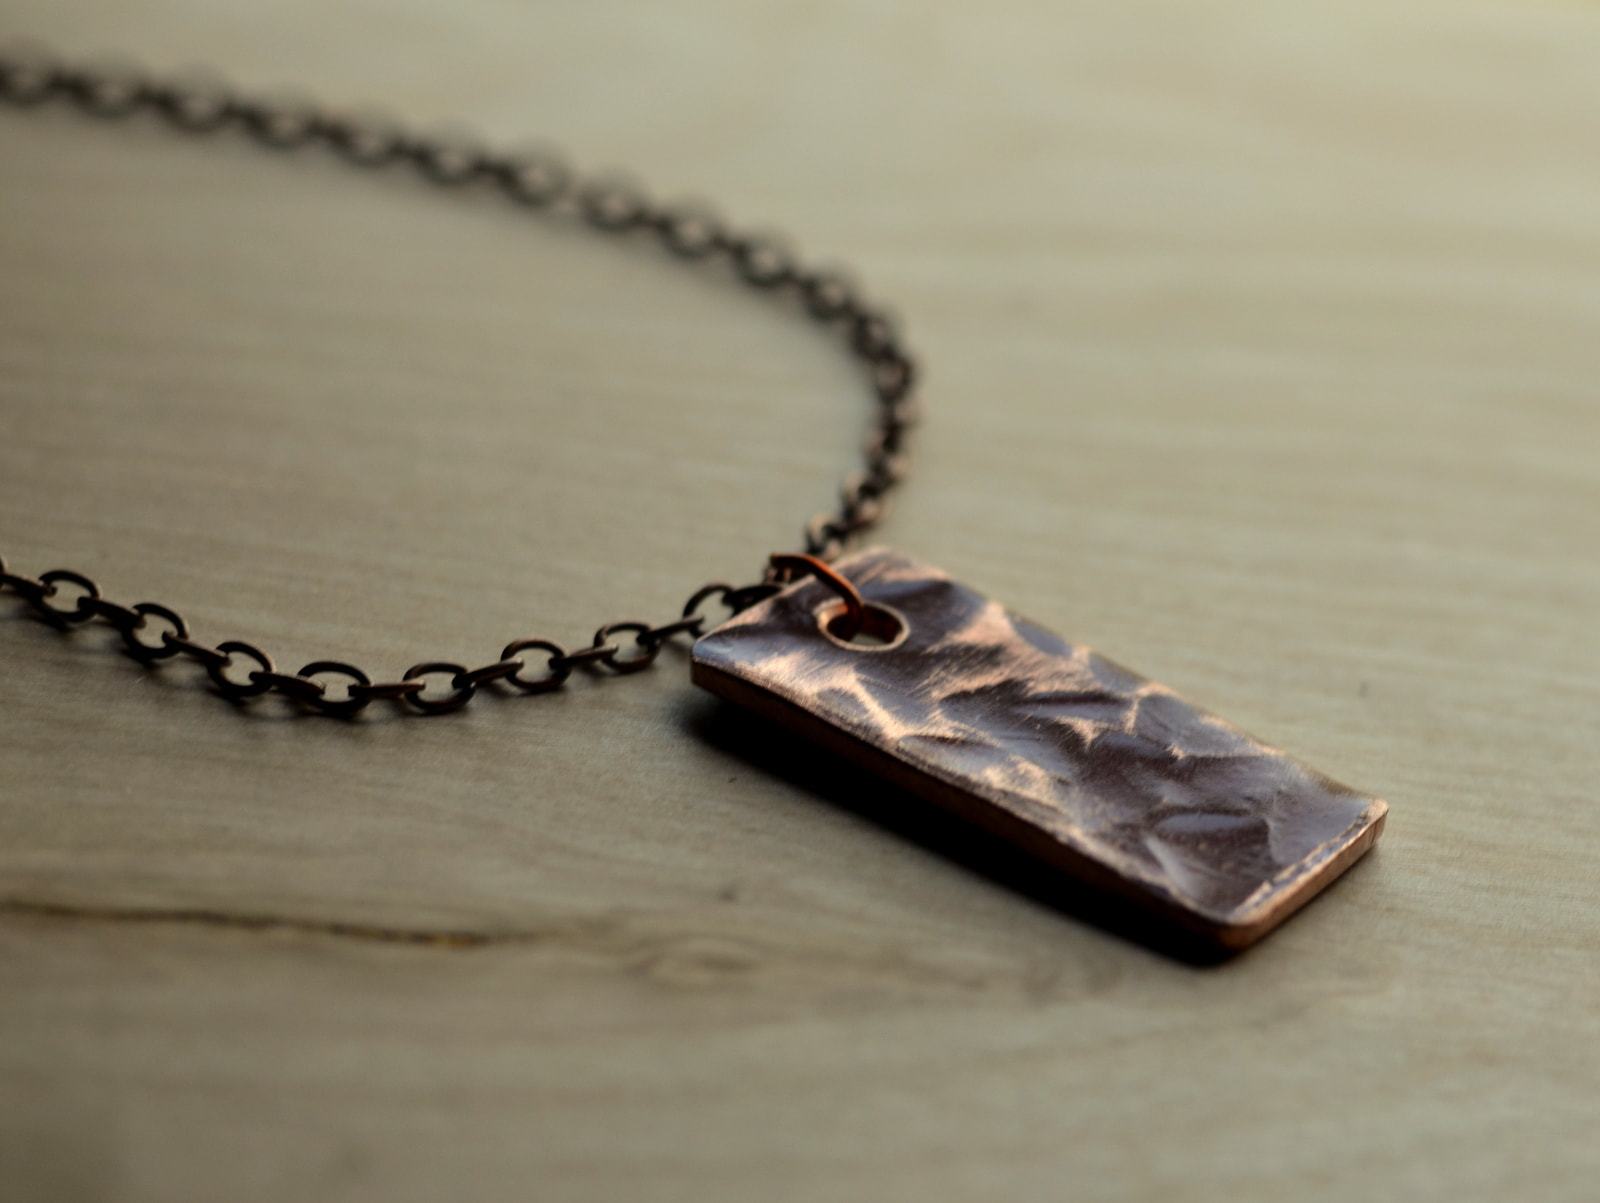 Hammered Copper Pendant and Necklace in Lightly Hammered Styling with Sheen